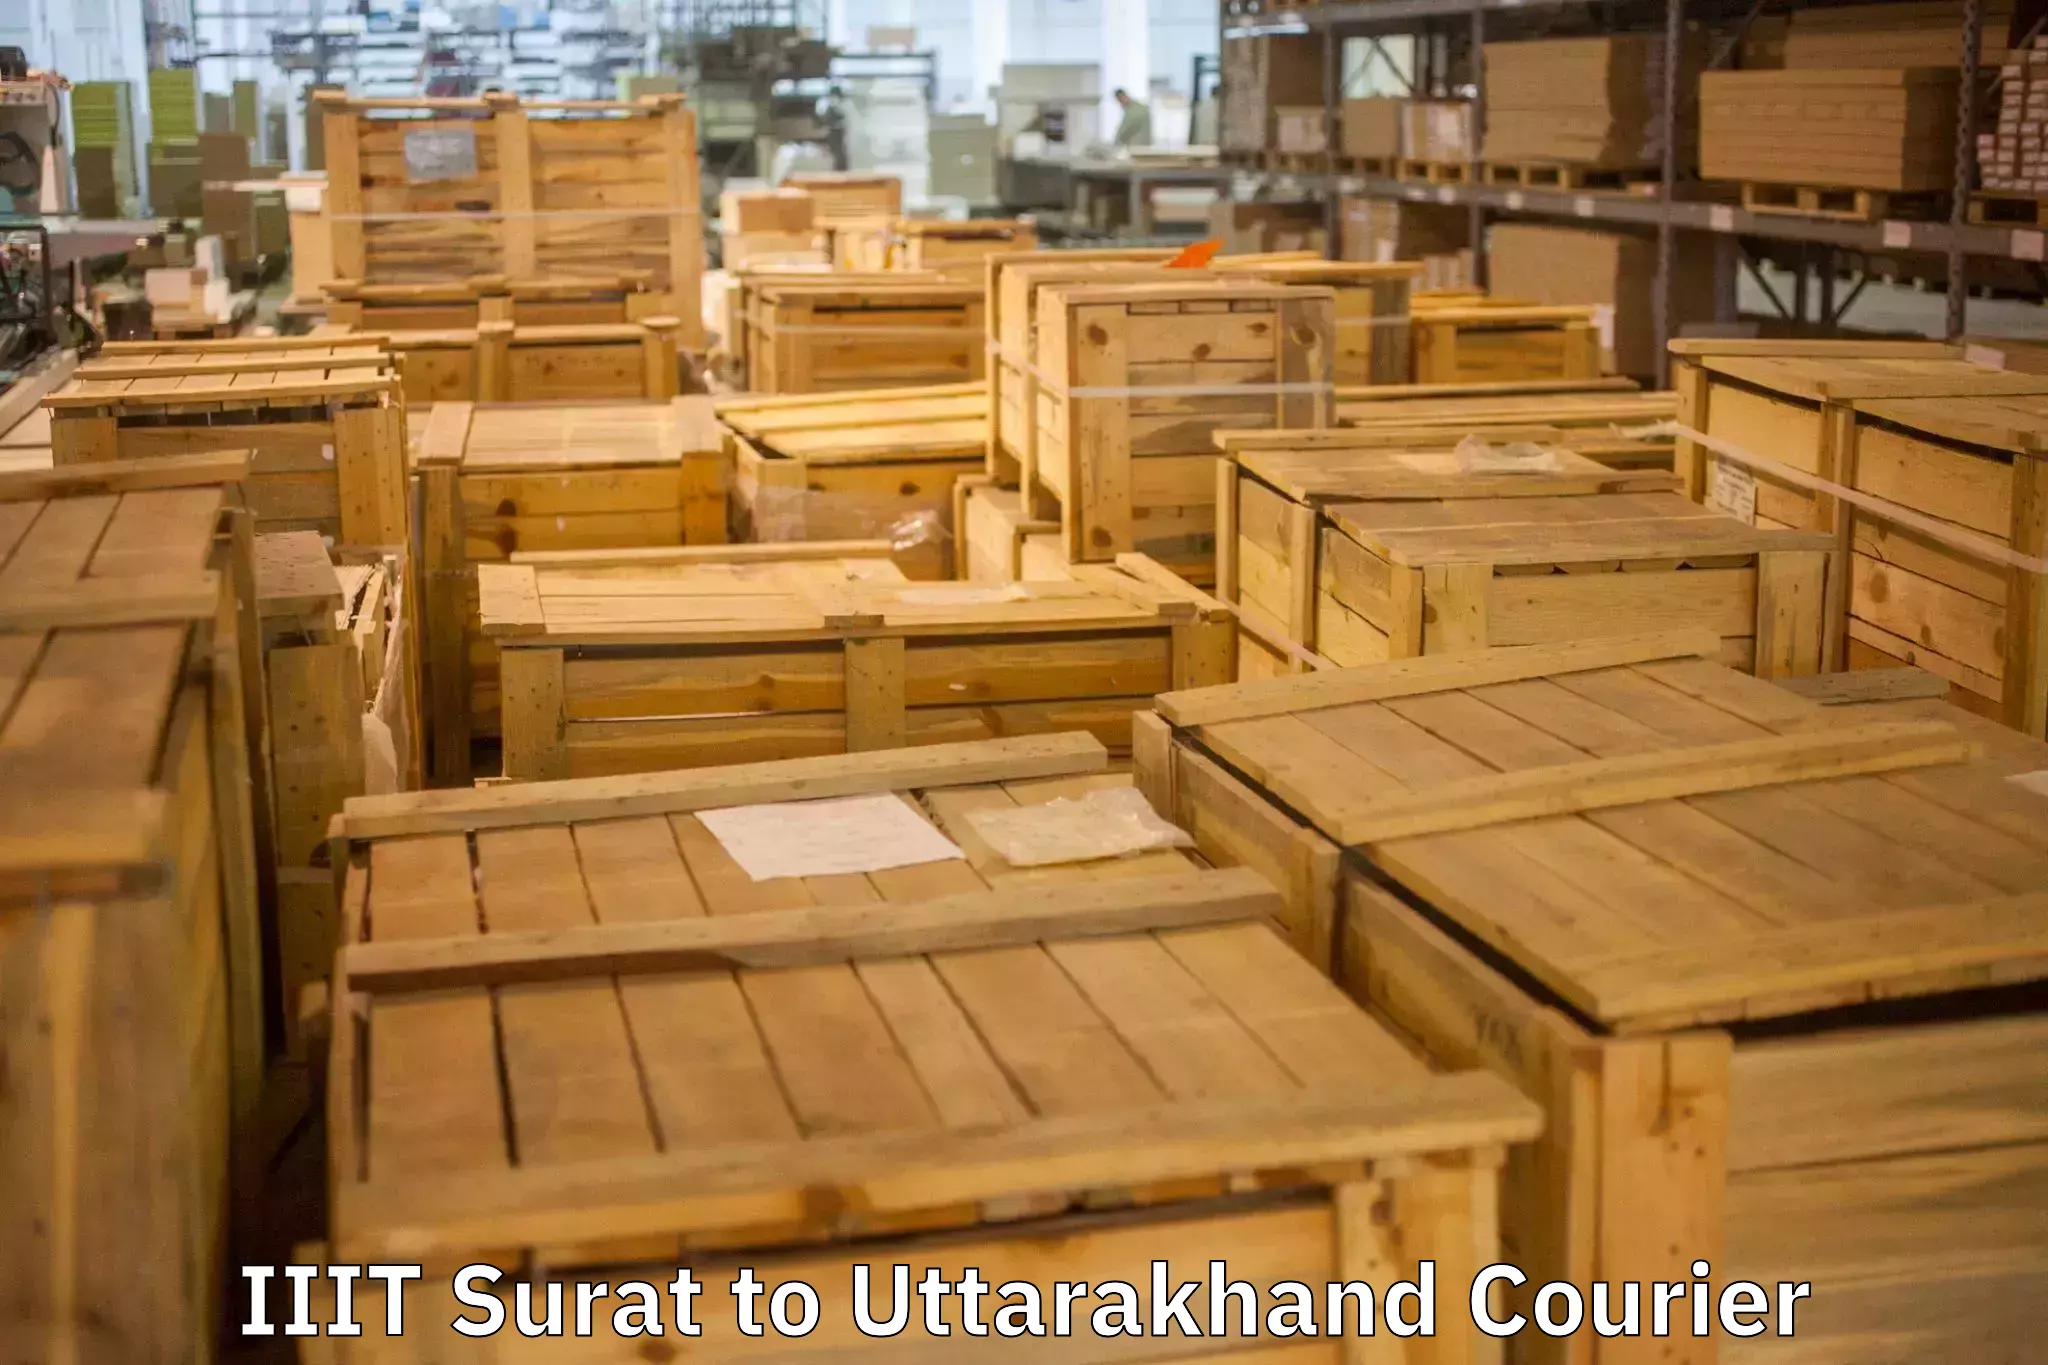 Furniture moving experts IIIT Surat to Bhagwanpur